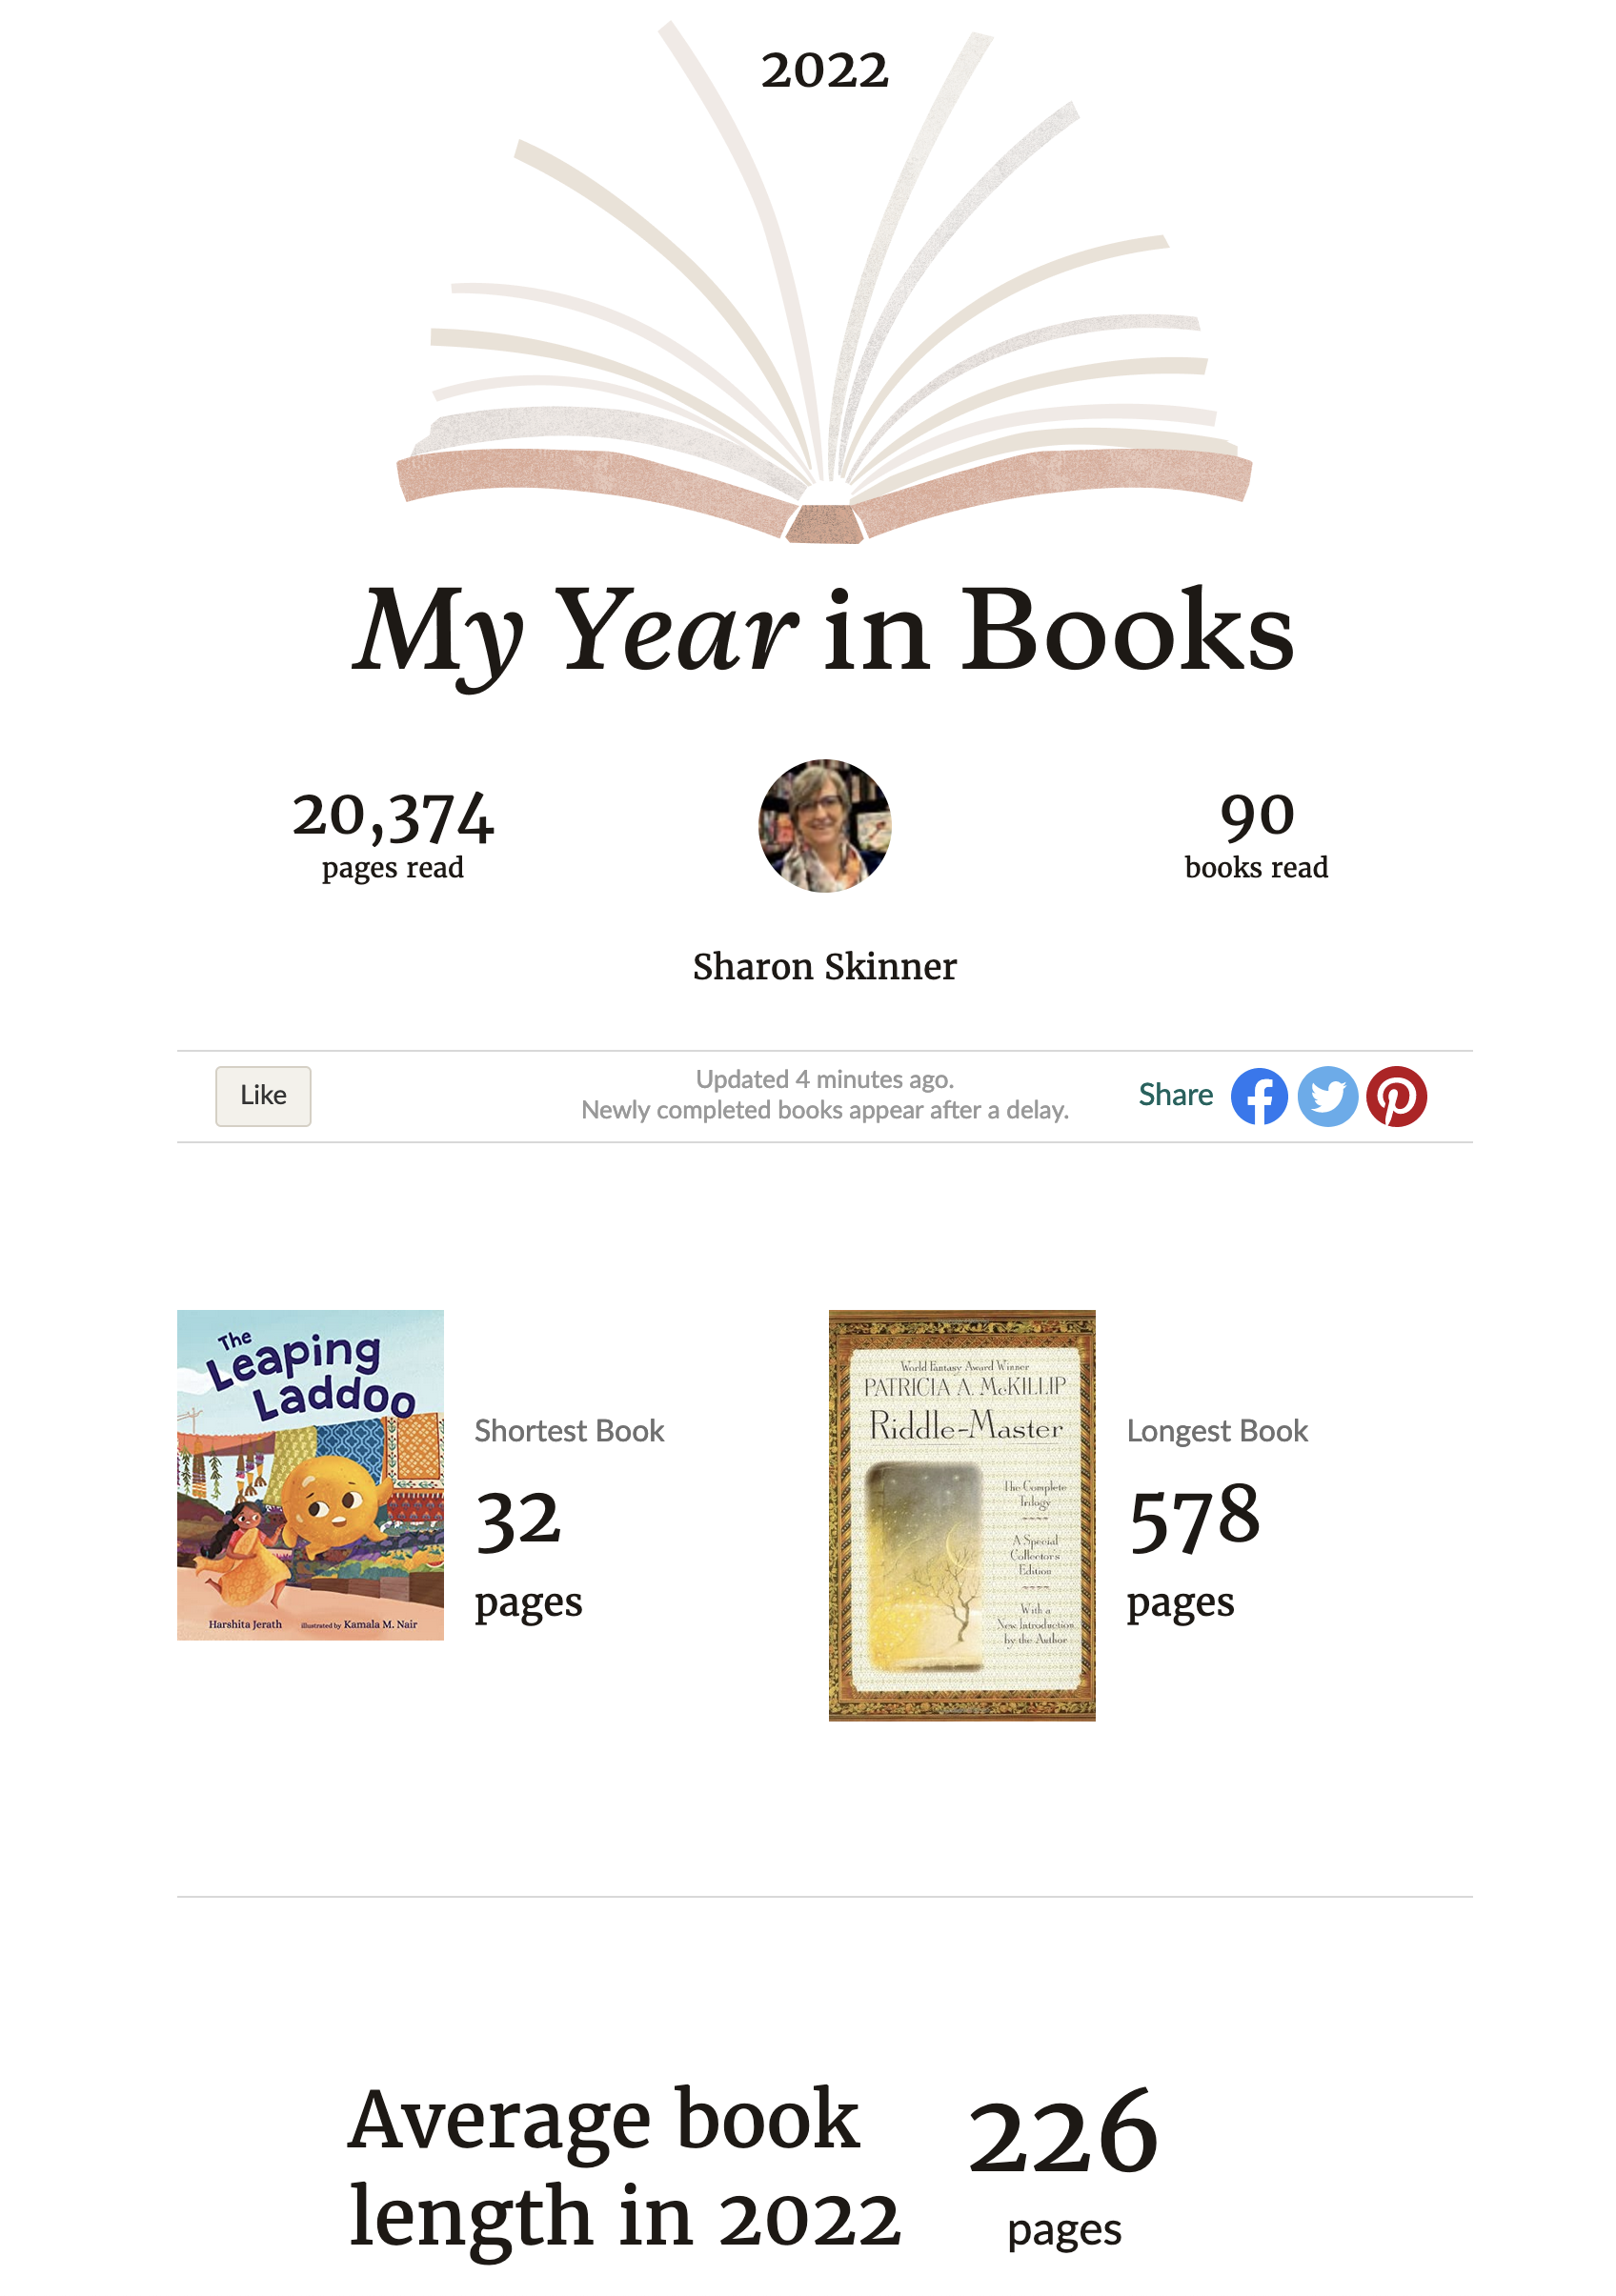 Image summarizing my 2022 book stats from my Goodreads page.